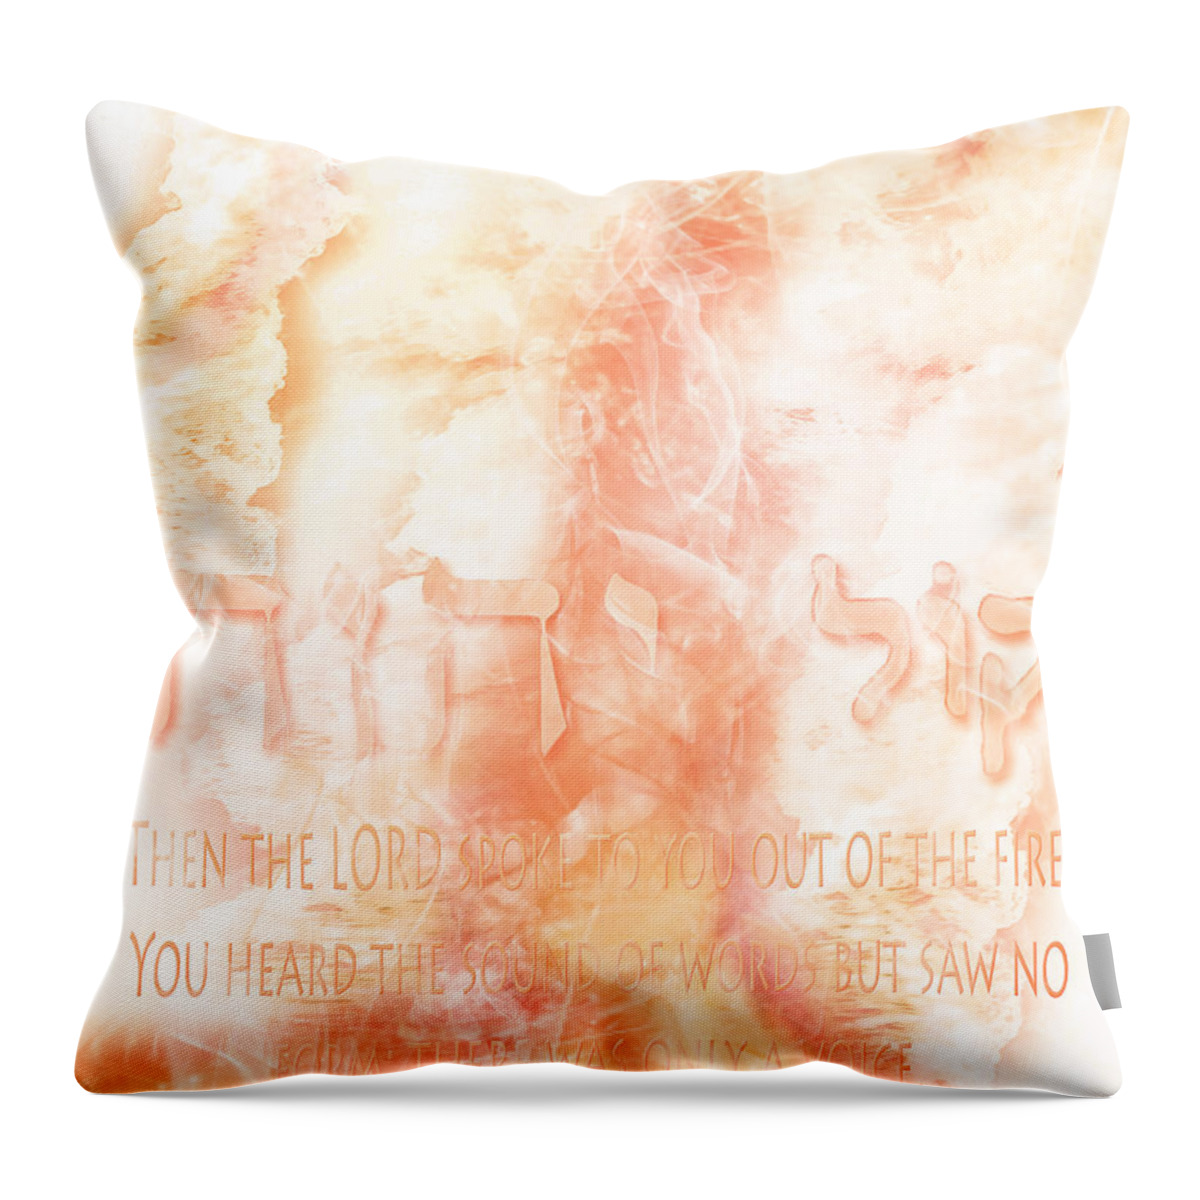 Voice Of Fire Throw Pillow featuring the digital art Voice of Fire by Jennifer Page